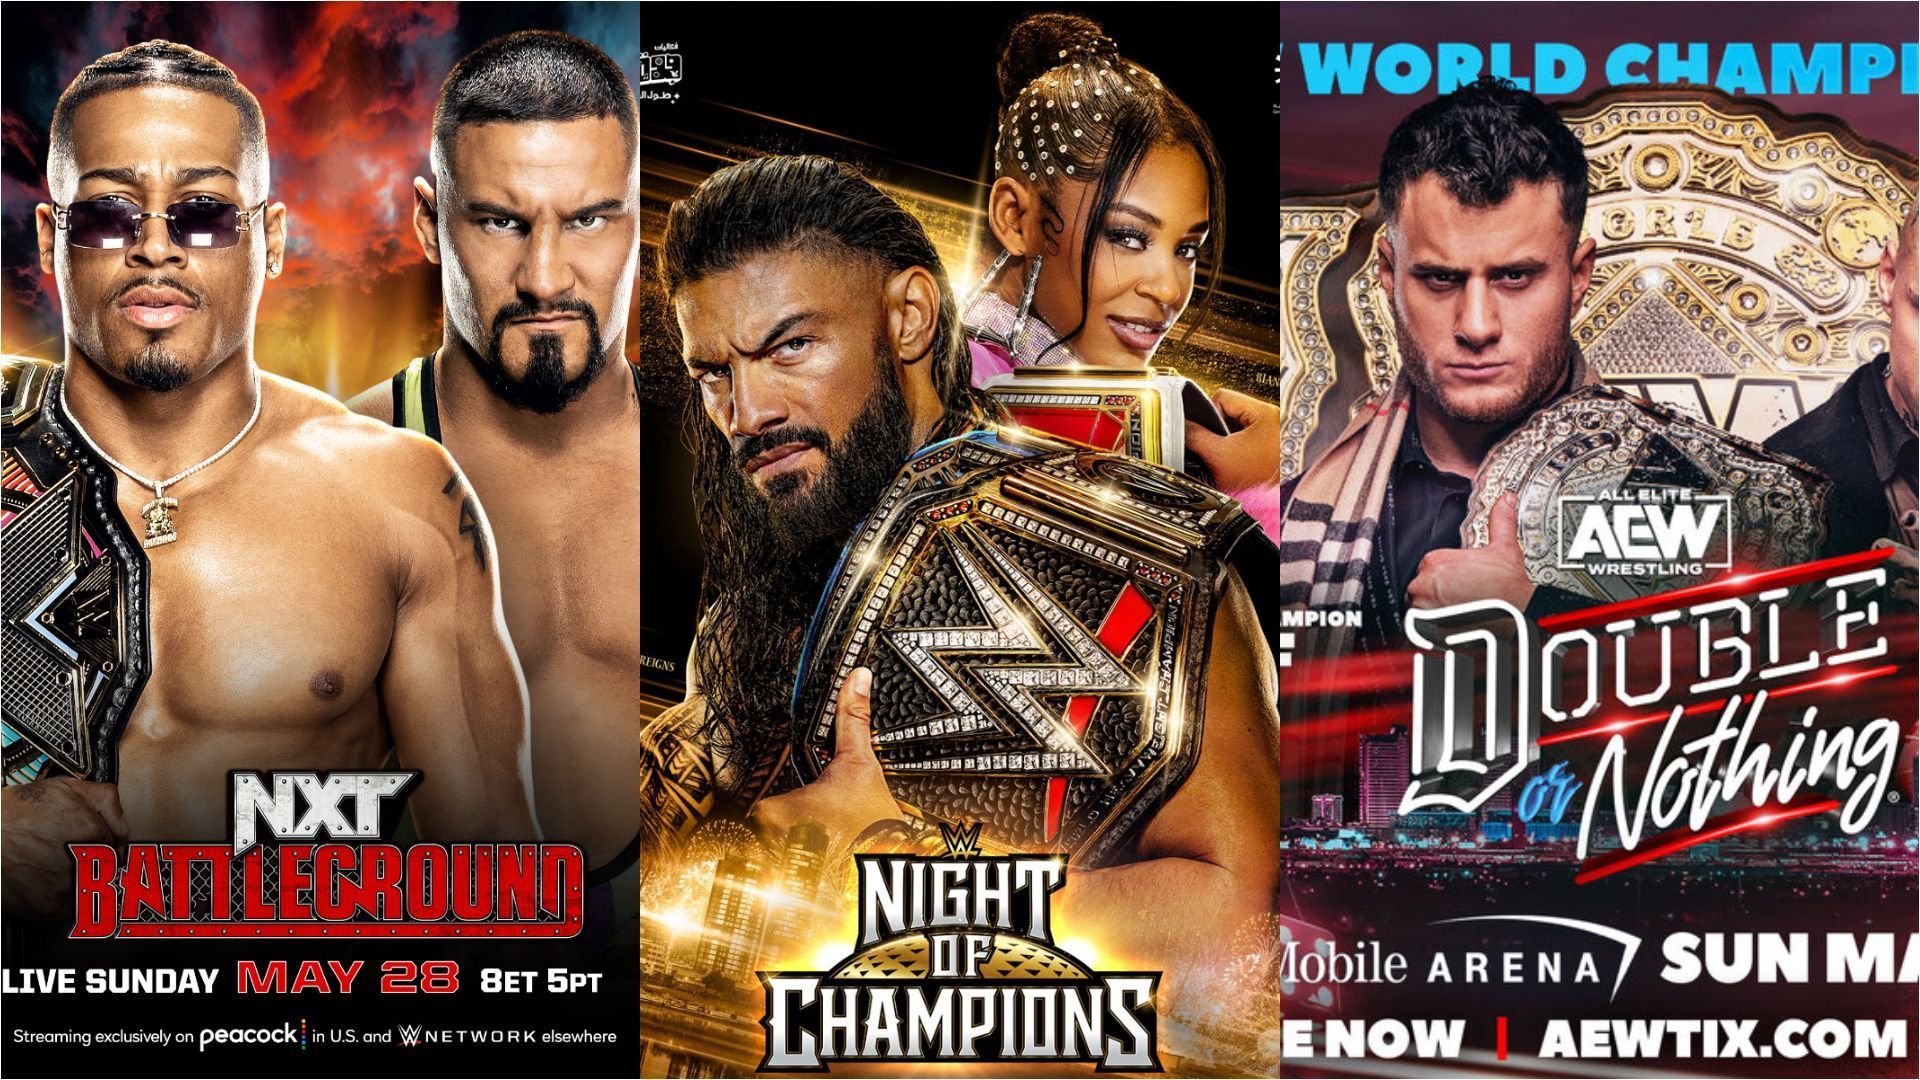 WWE and AEW fans will be spoilt with great wrestling this weekend